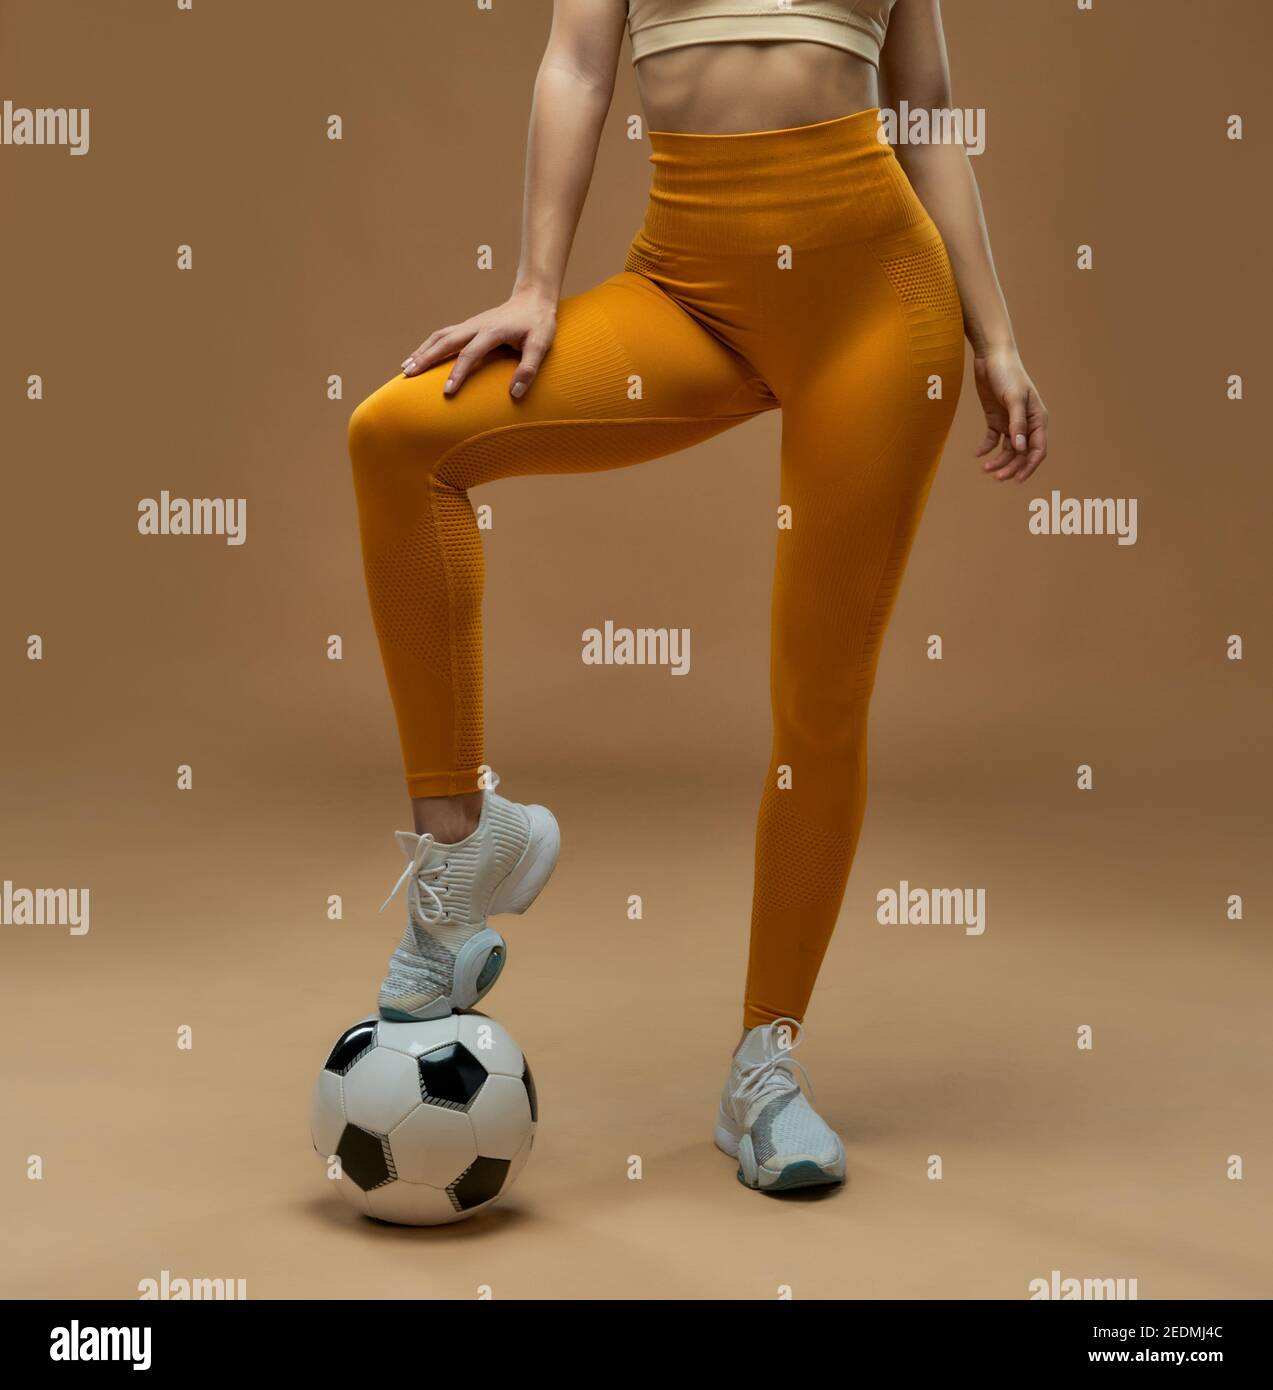 Female football player wearing sports leggings while posing with